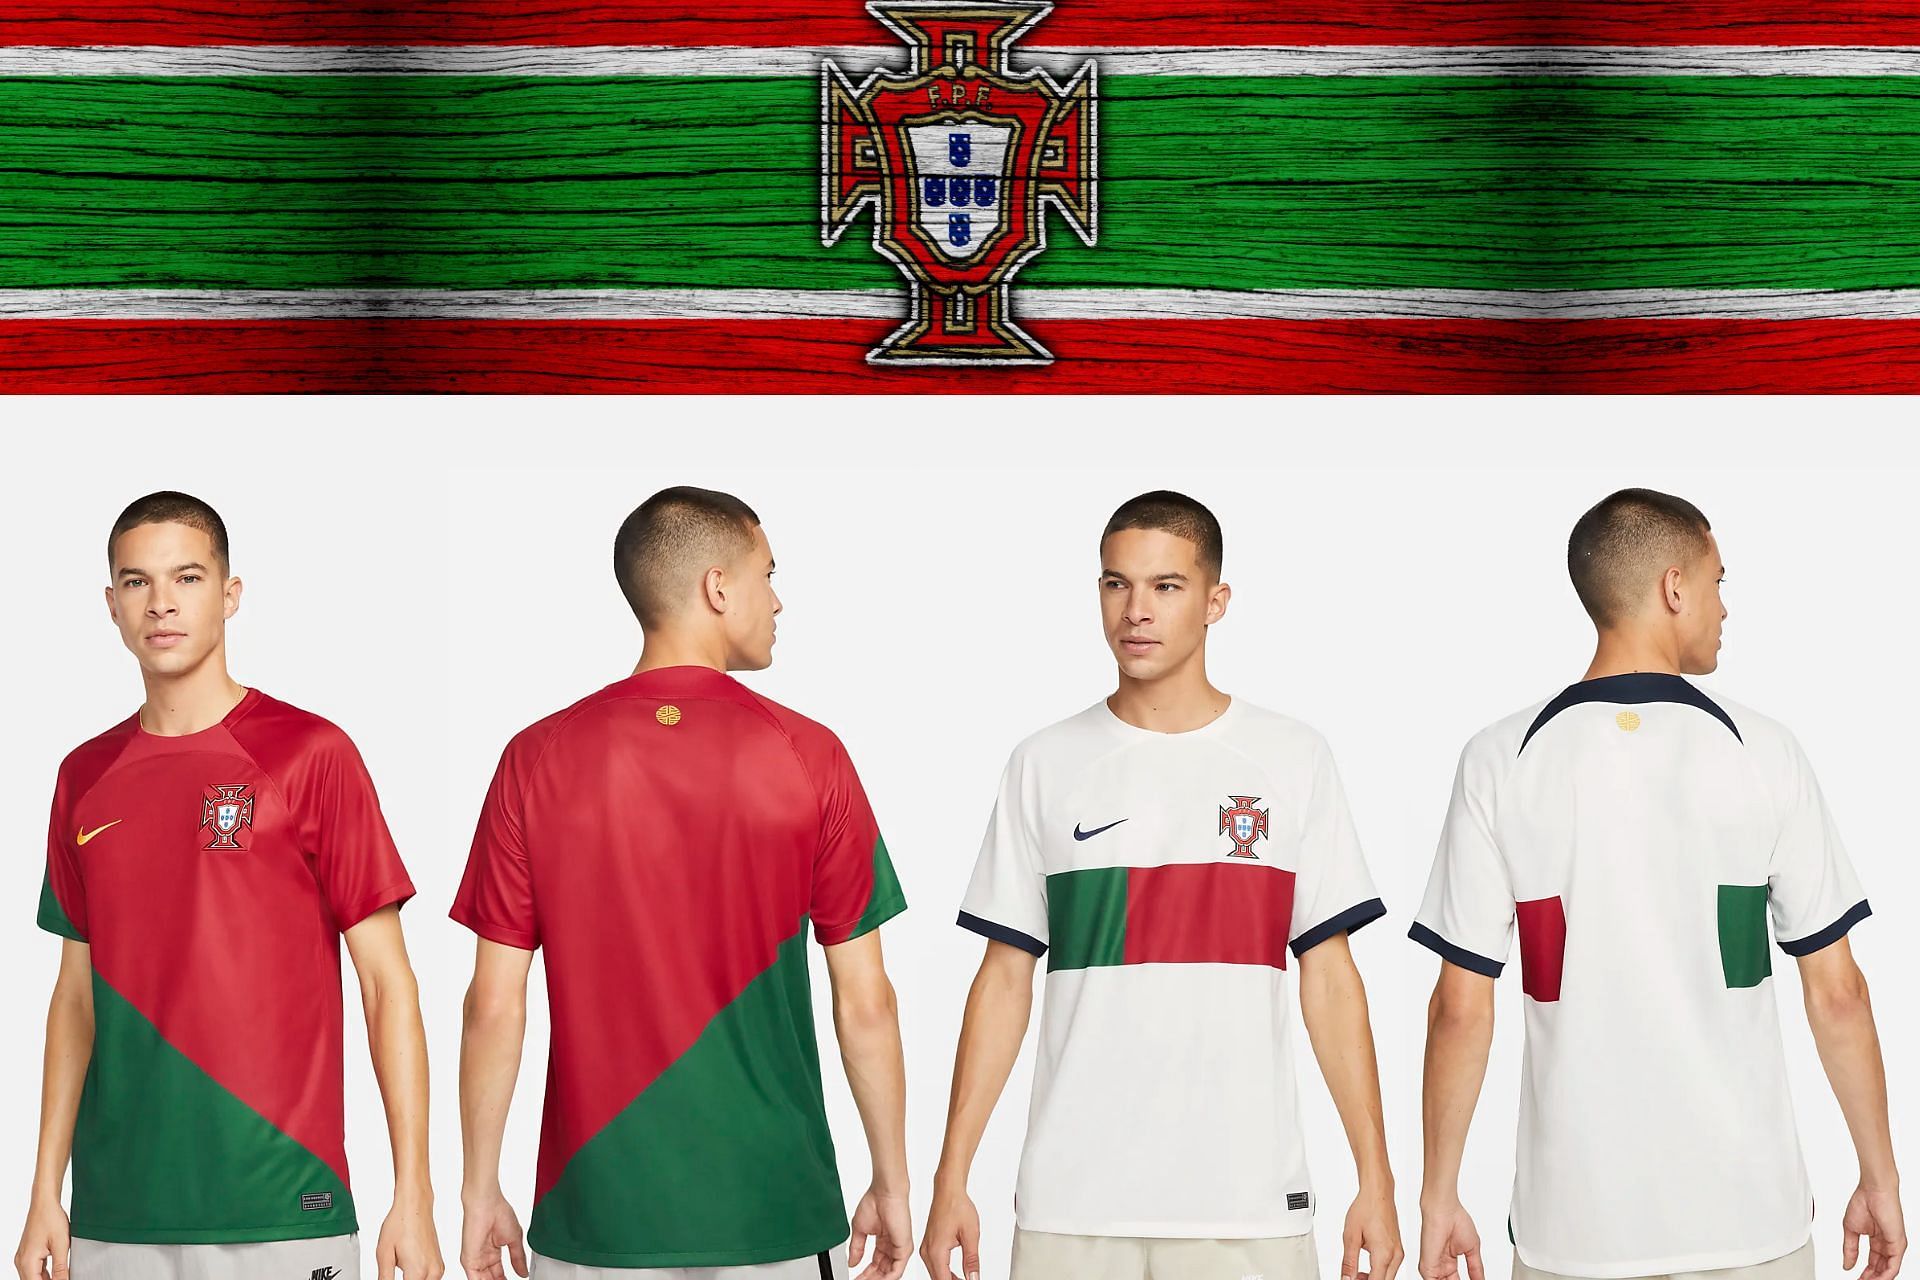 The recently released 2022 Portugal Men&rsquo;s National Football Team kit that serves as a symbol of national pride (Image via Sportskeeda)